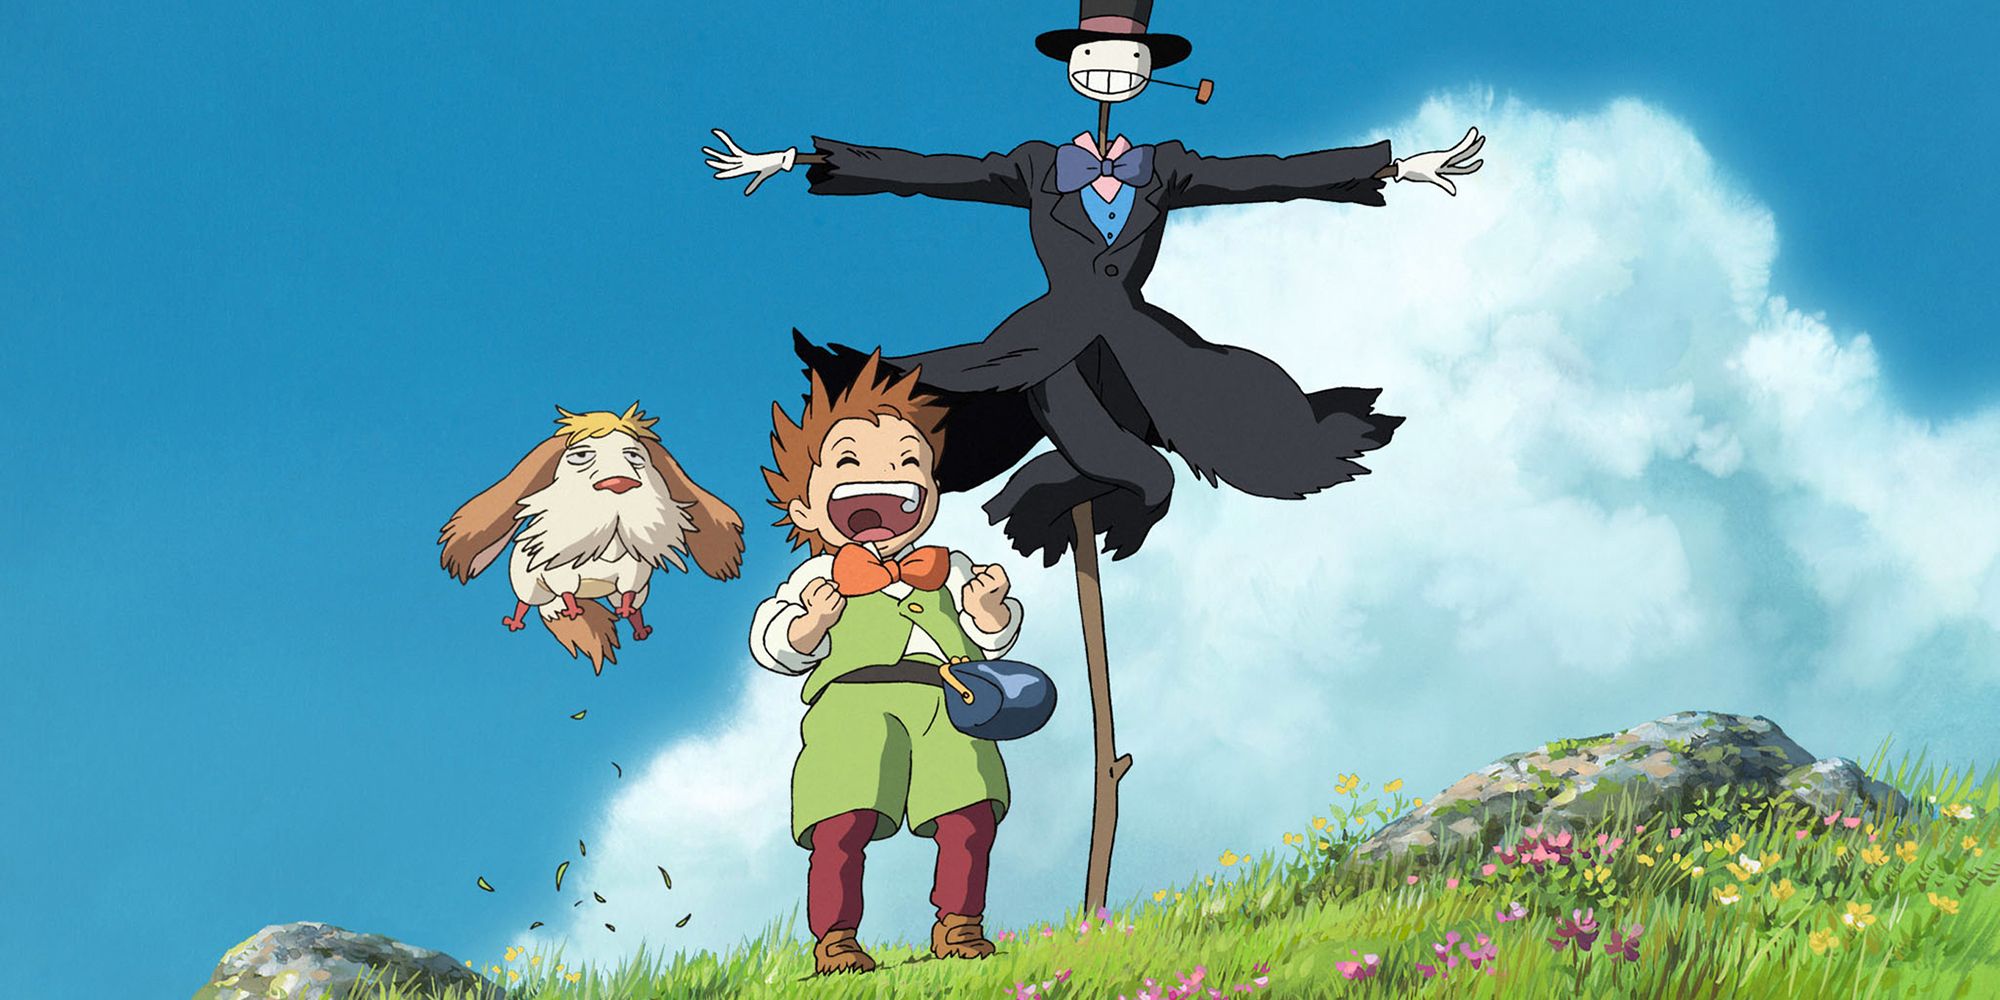 Markl, Heen, and the scarecrow in Howl's Moving Castle